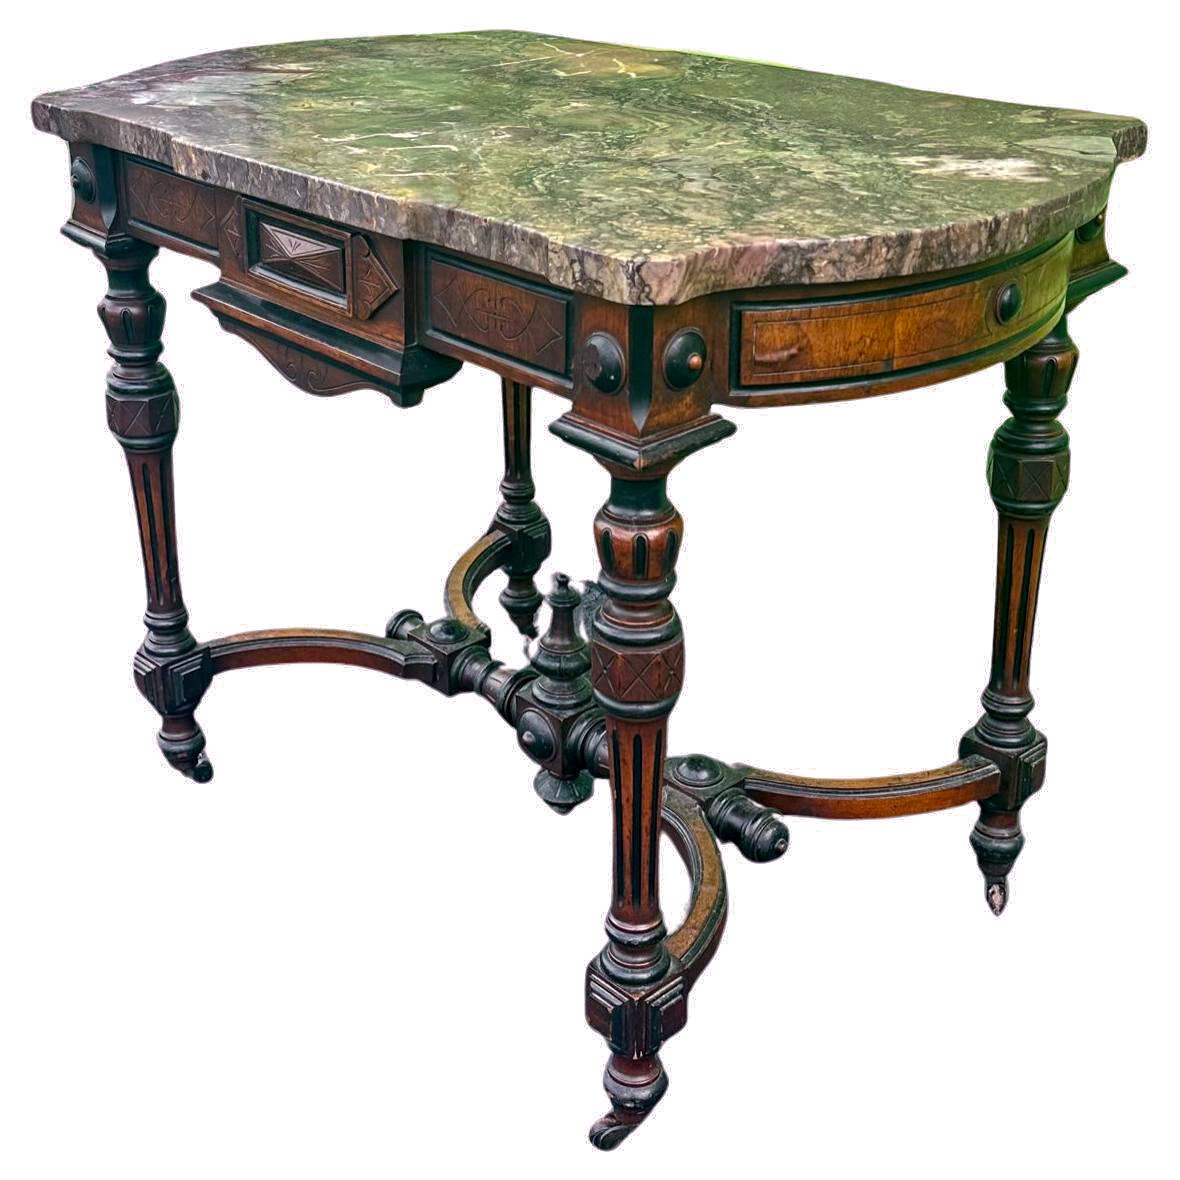 French 19th Century Napoleon III Period Marble Top Table

The antique center table is built with walnut, ebonized and exotic wood. The original beautiful Rouge Royal marble top surmounts this stunning table. It is raised on four turned and reeded